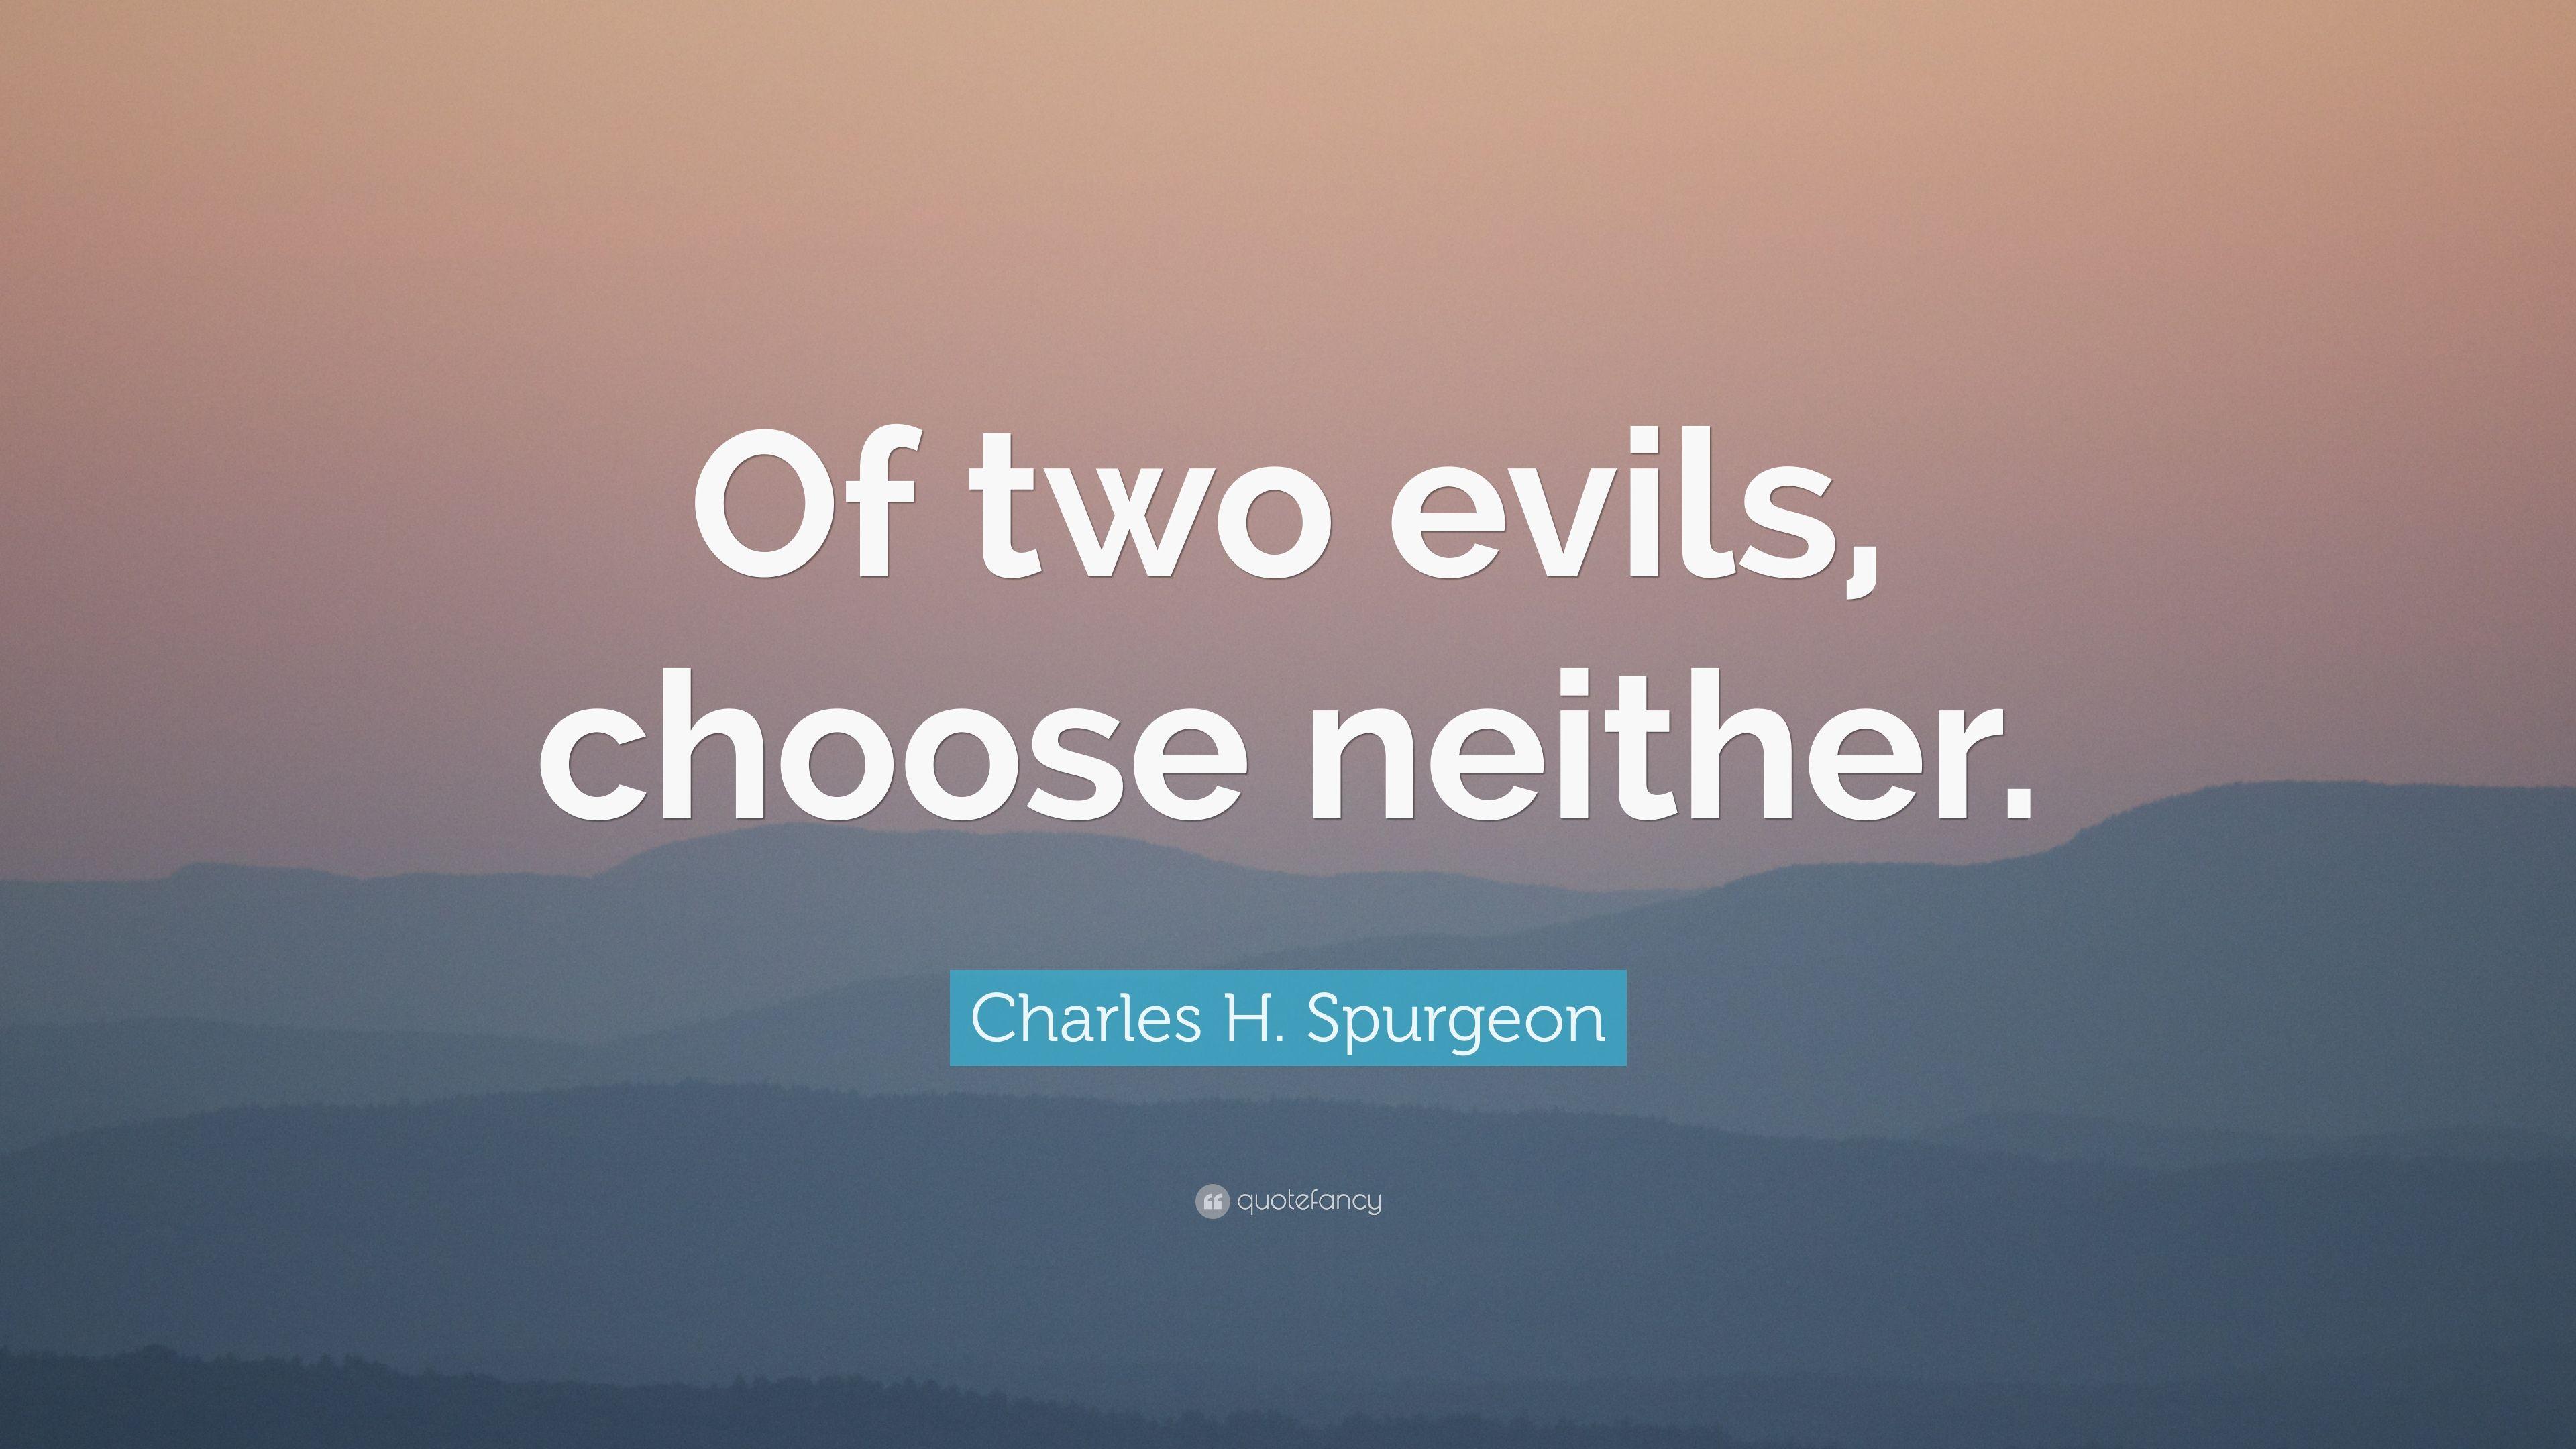 Charles H. Spurgeon Quote: "Of two evils, choose neither. 